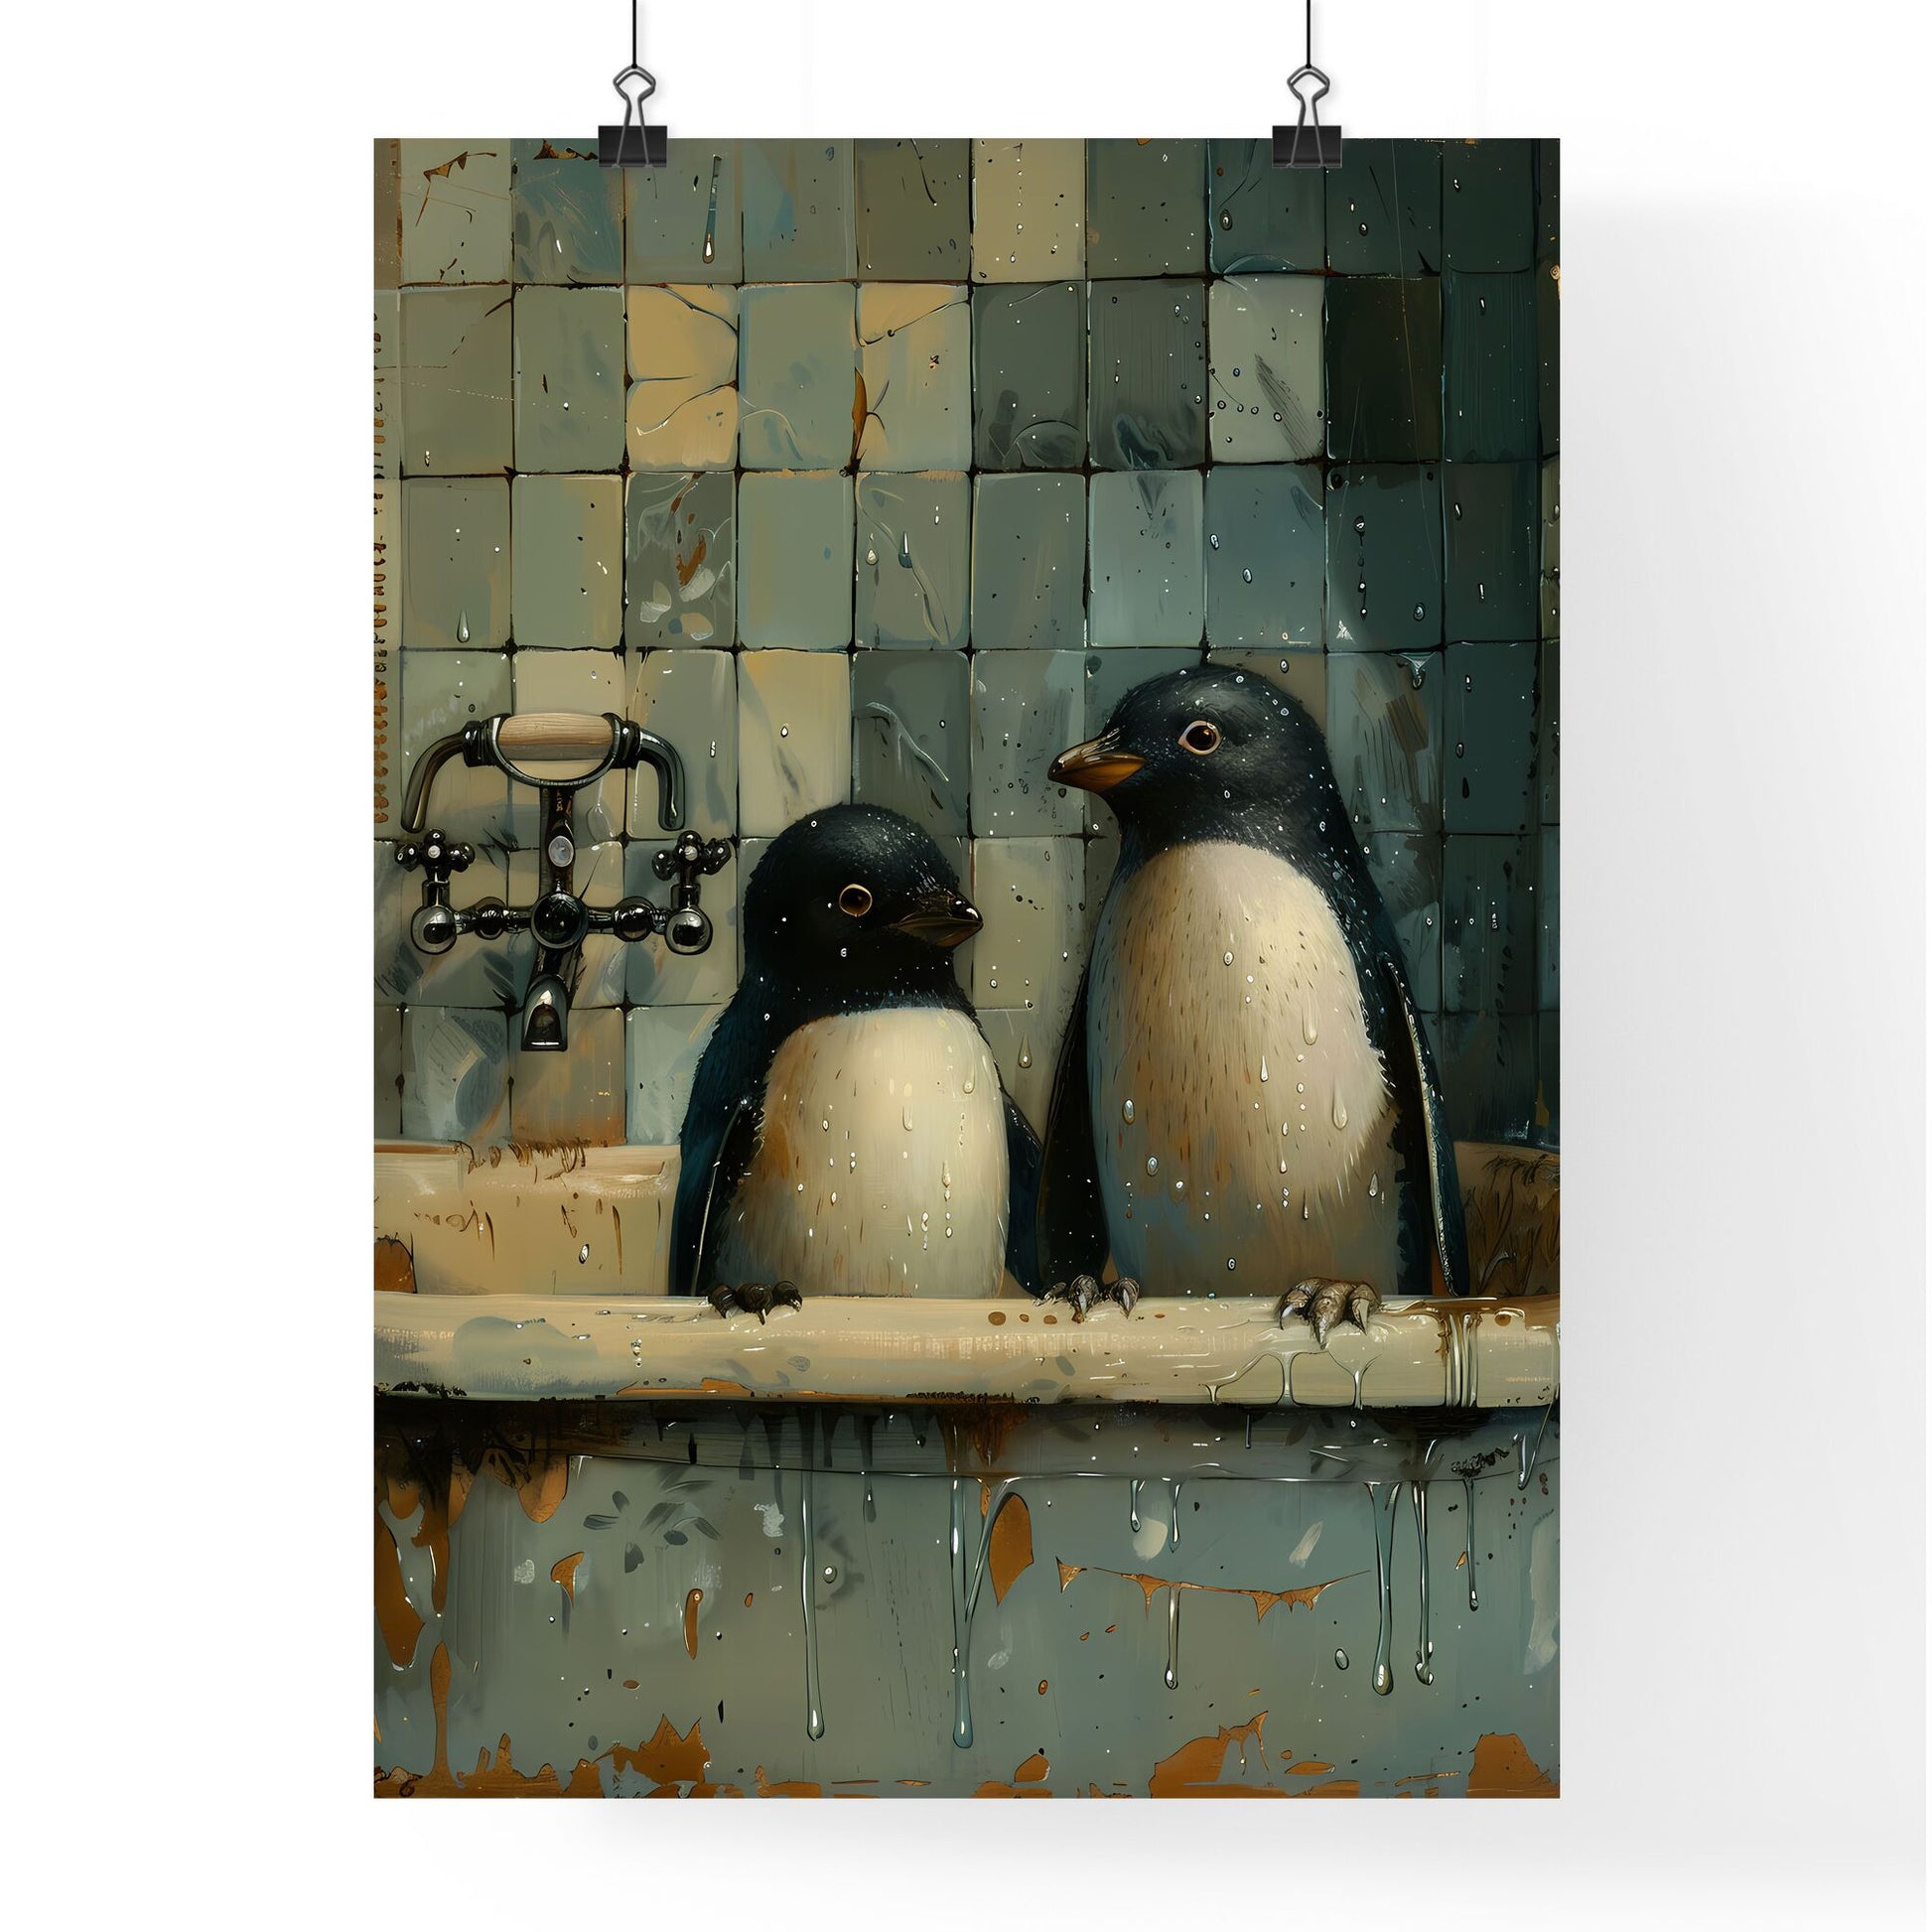 Wo penguins jump in a bathtub playing with each other, a storybook illustration, featured on cg society, art photography, whimsical, behance hd, storybook illustration black and white vintage - two penguins in a bathtub Default Title